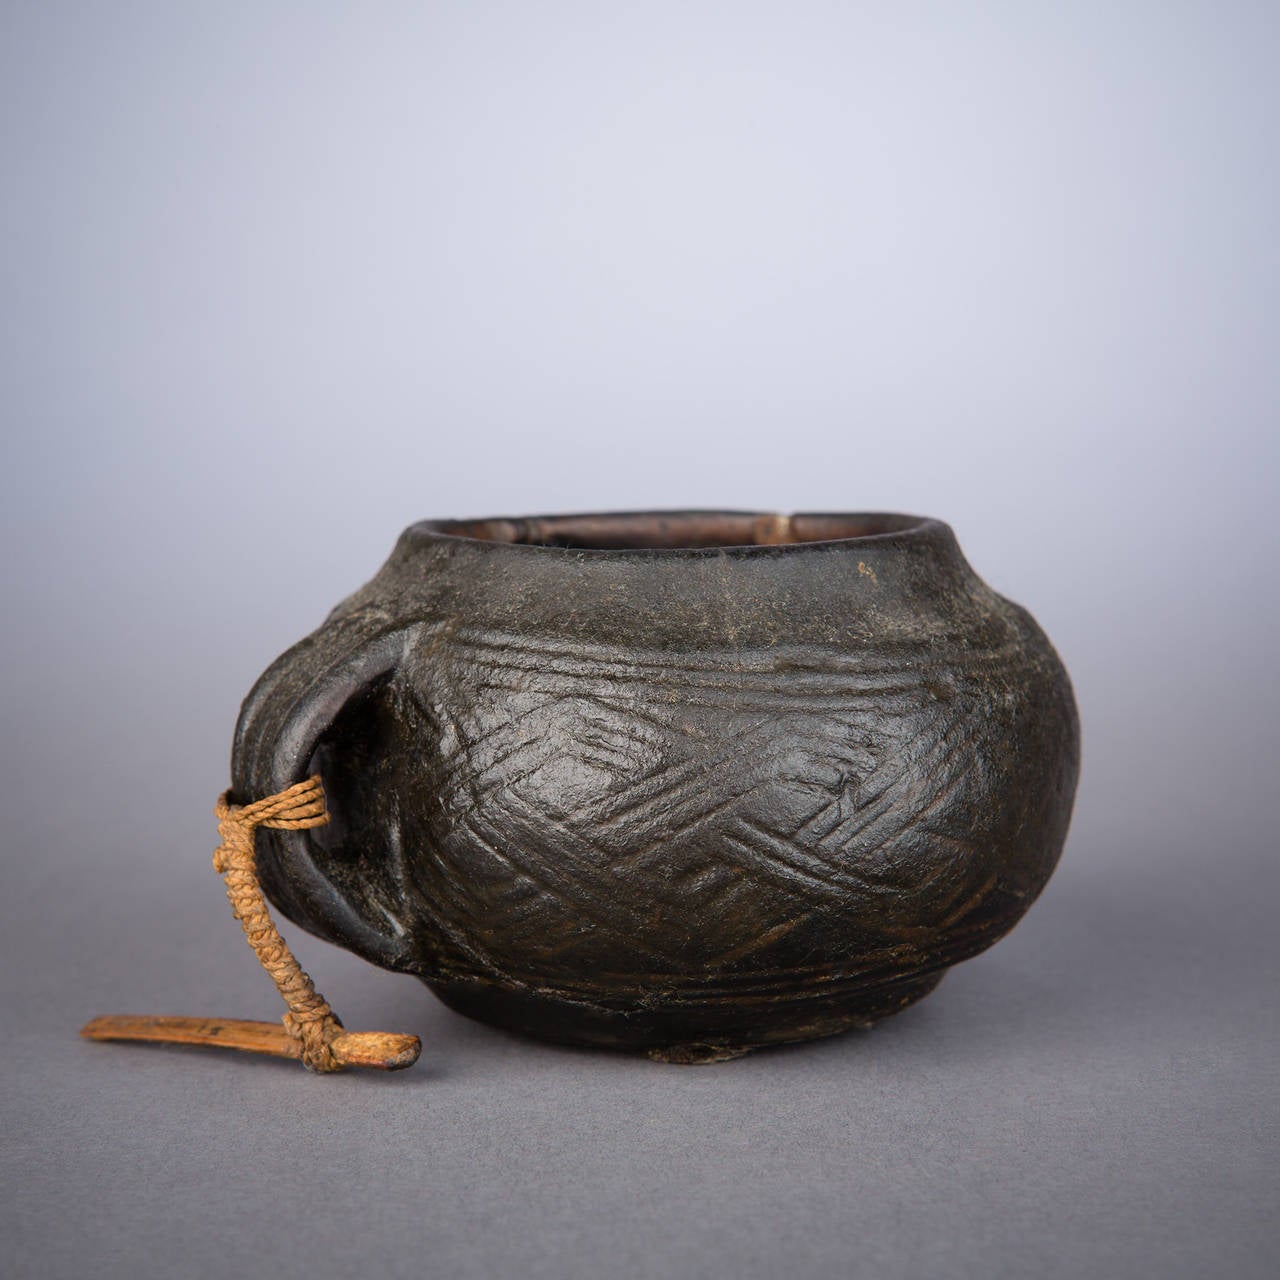 A very early Kuba cup heavily saturated with palm oil. Traditional Kuba geometric designs weave in faint relief around the cup's circumference. A fiber suspension cord remains attached to the handle. In good condition and old vertical split next to